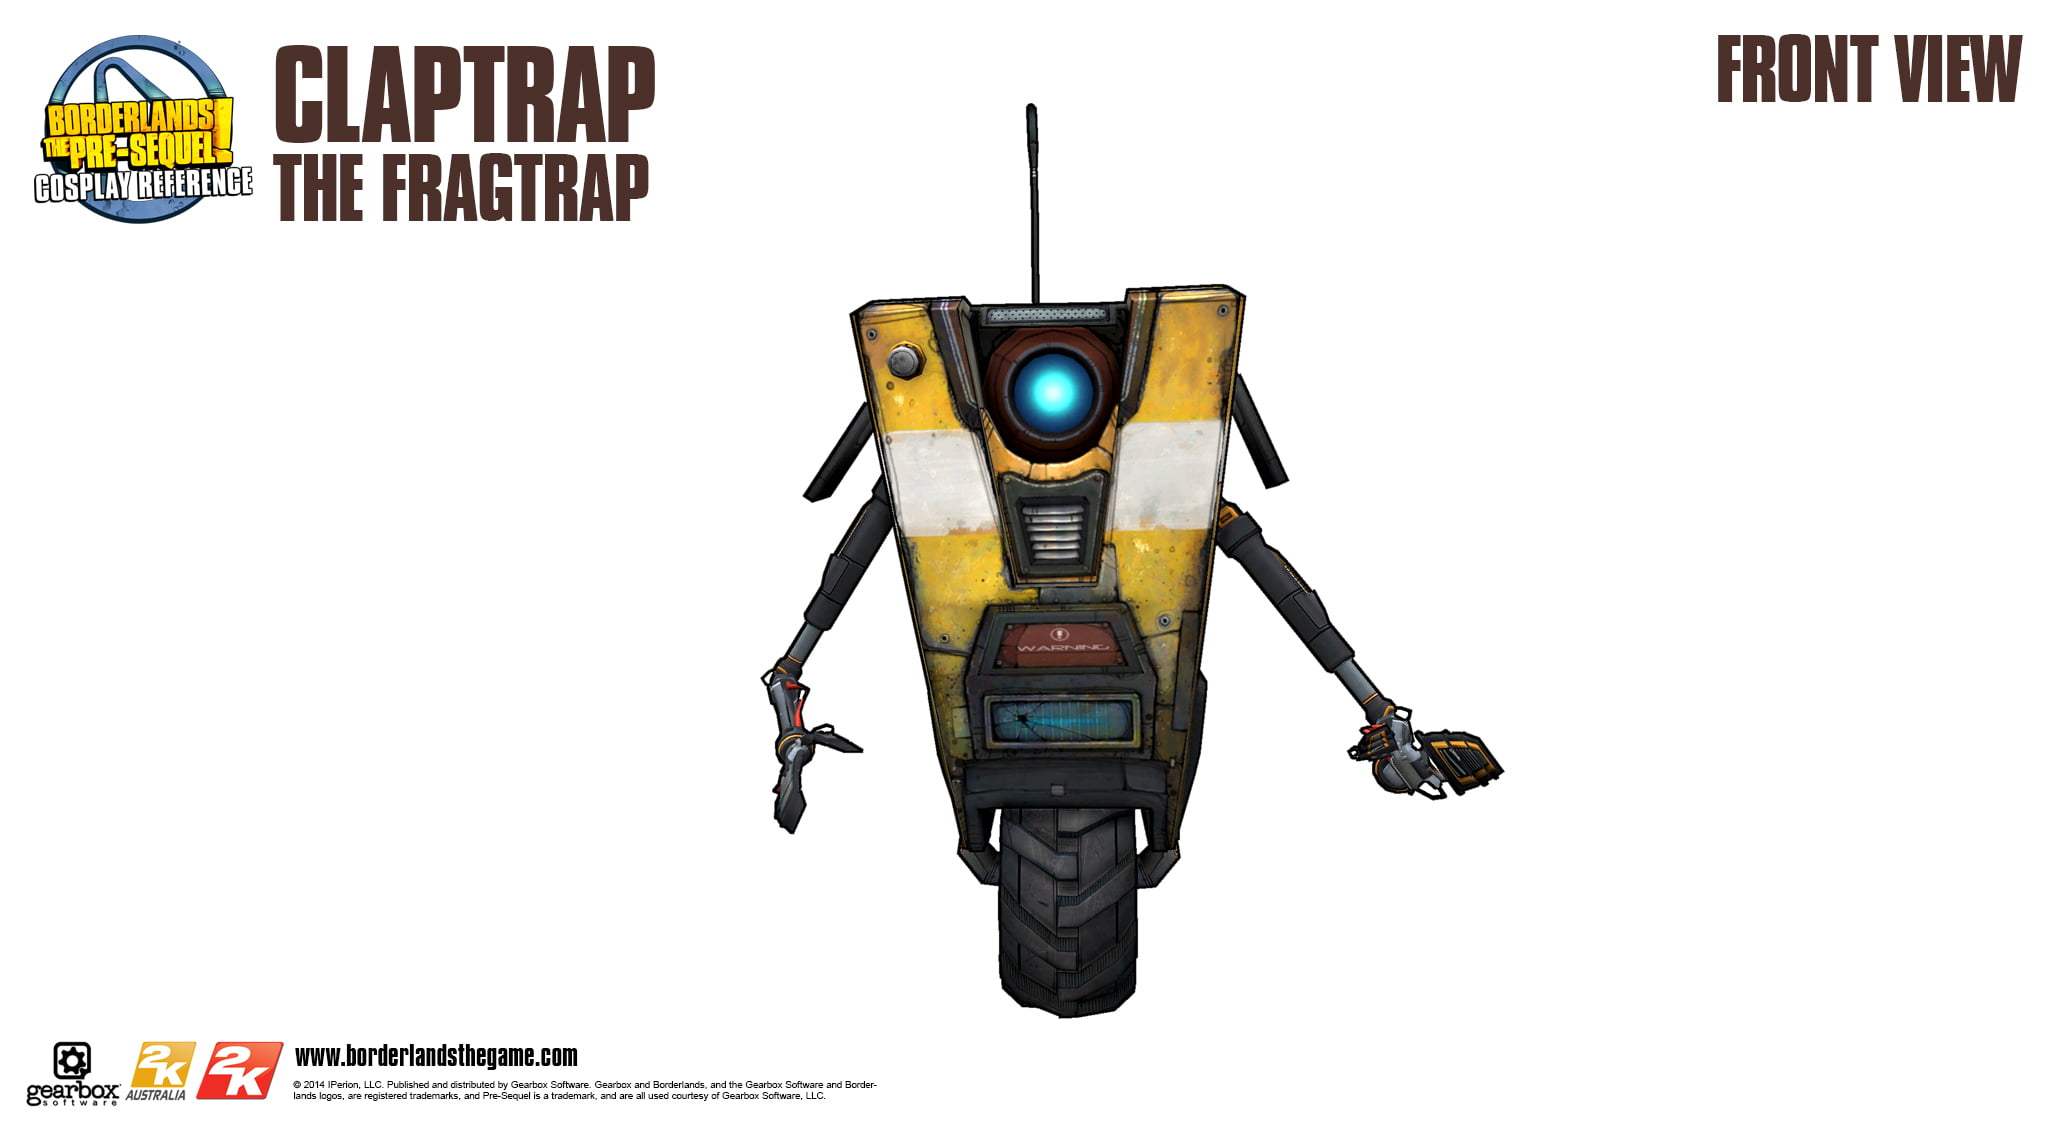 yellow and black Claptrap The Fragtrap robot with text overlay